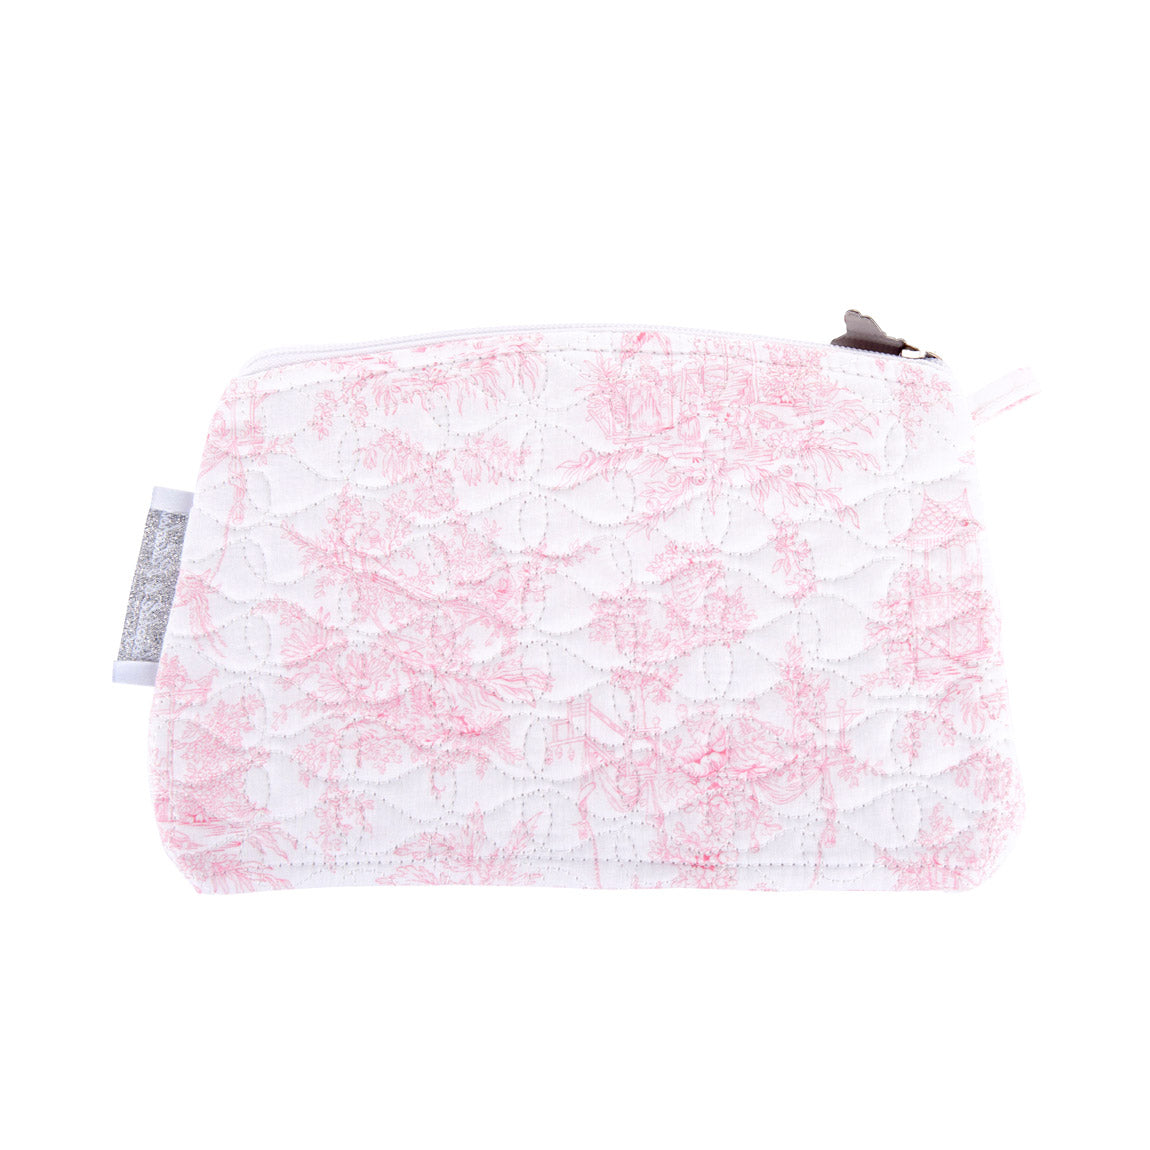 Theophile & Patachou Small Handbag Quilted - Sweet Pink